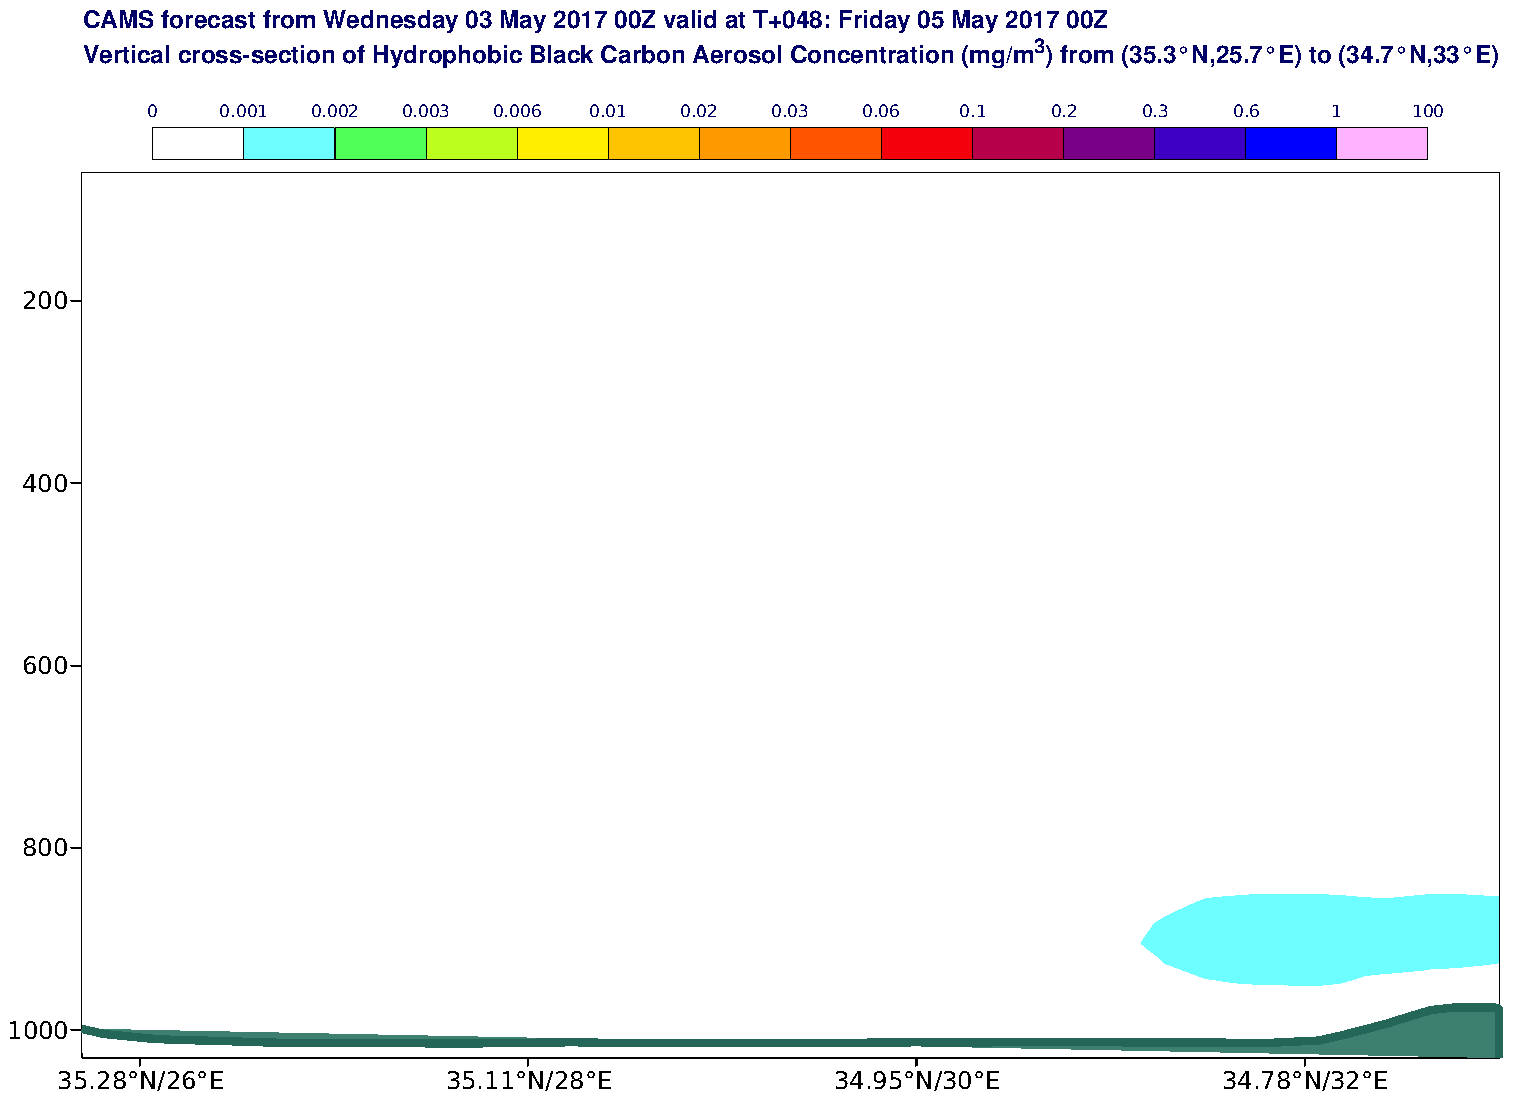 Vertical cross-section of Hydrophobic Black Carbon Aerosol Concentration (mg/m3) valid at T48 - 2017-05-05 00:00